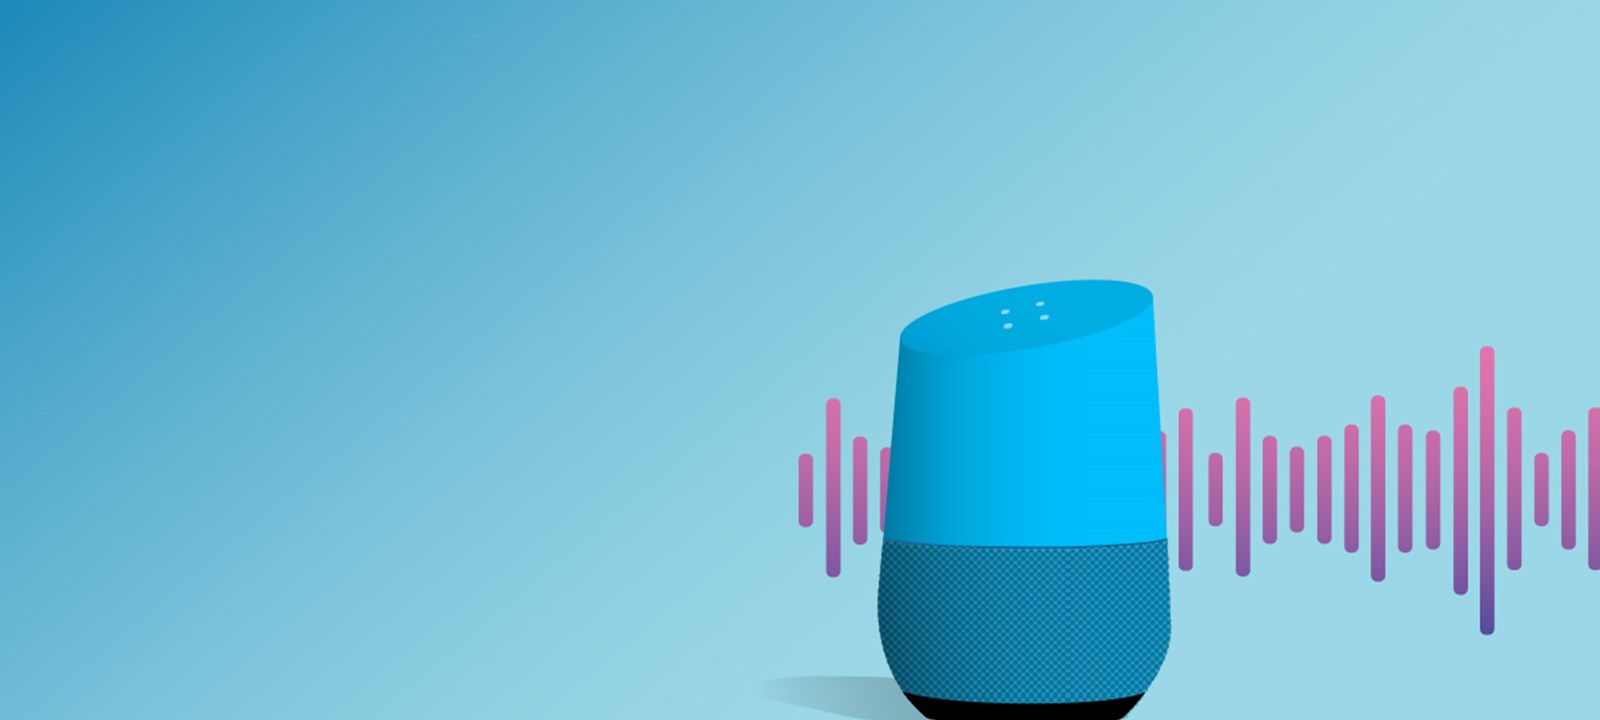 Conversational interfaces, voice & smart speakers. 
Our future?